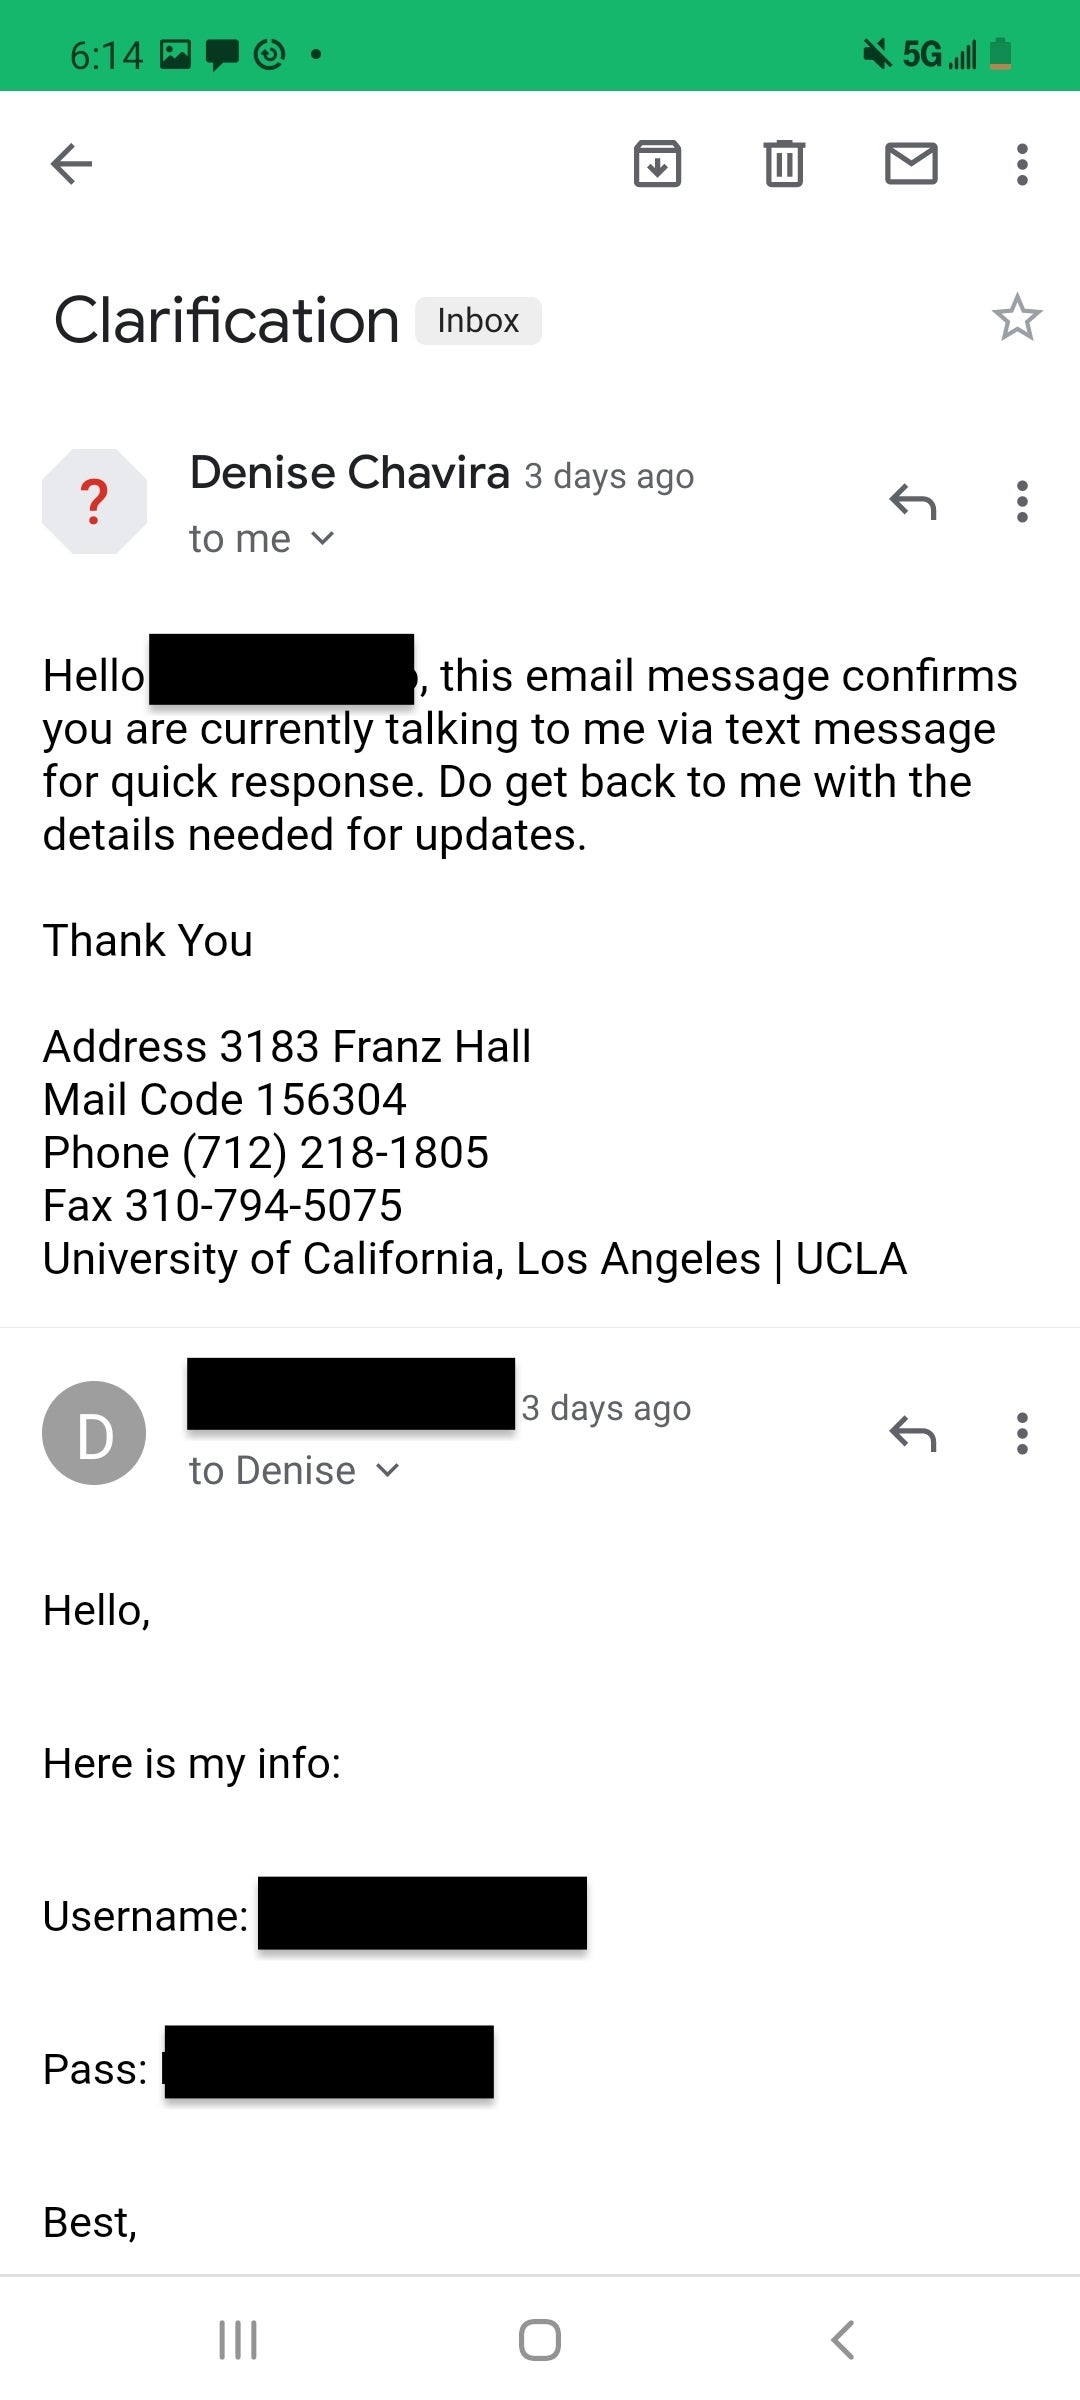 Job Opportunity Scams at UCLA